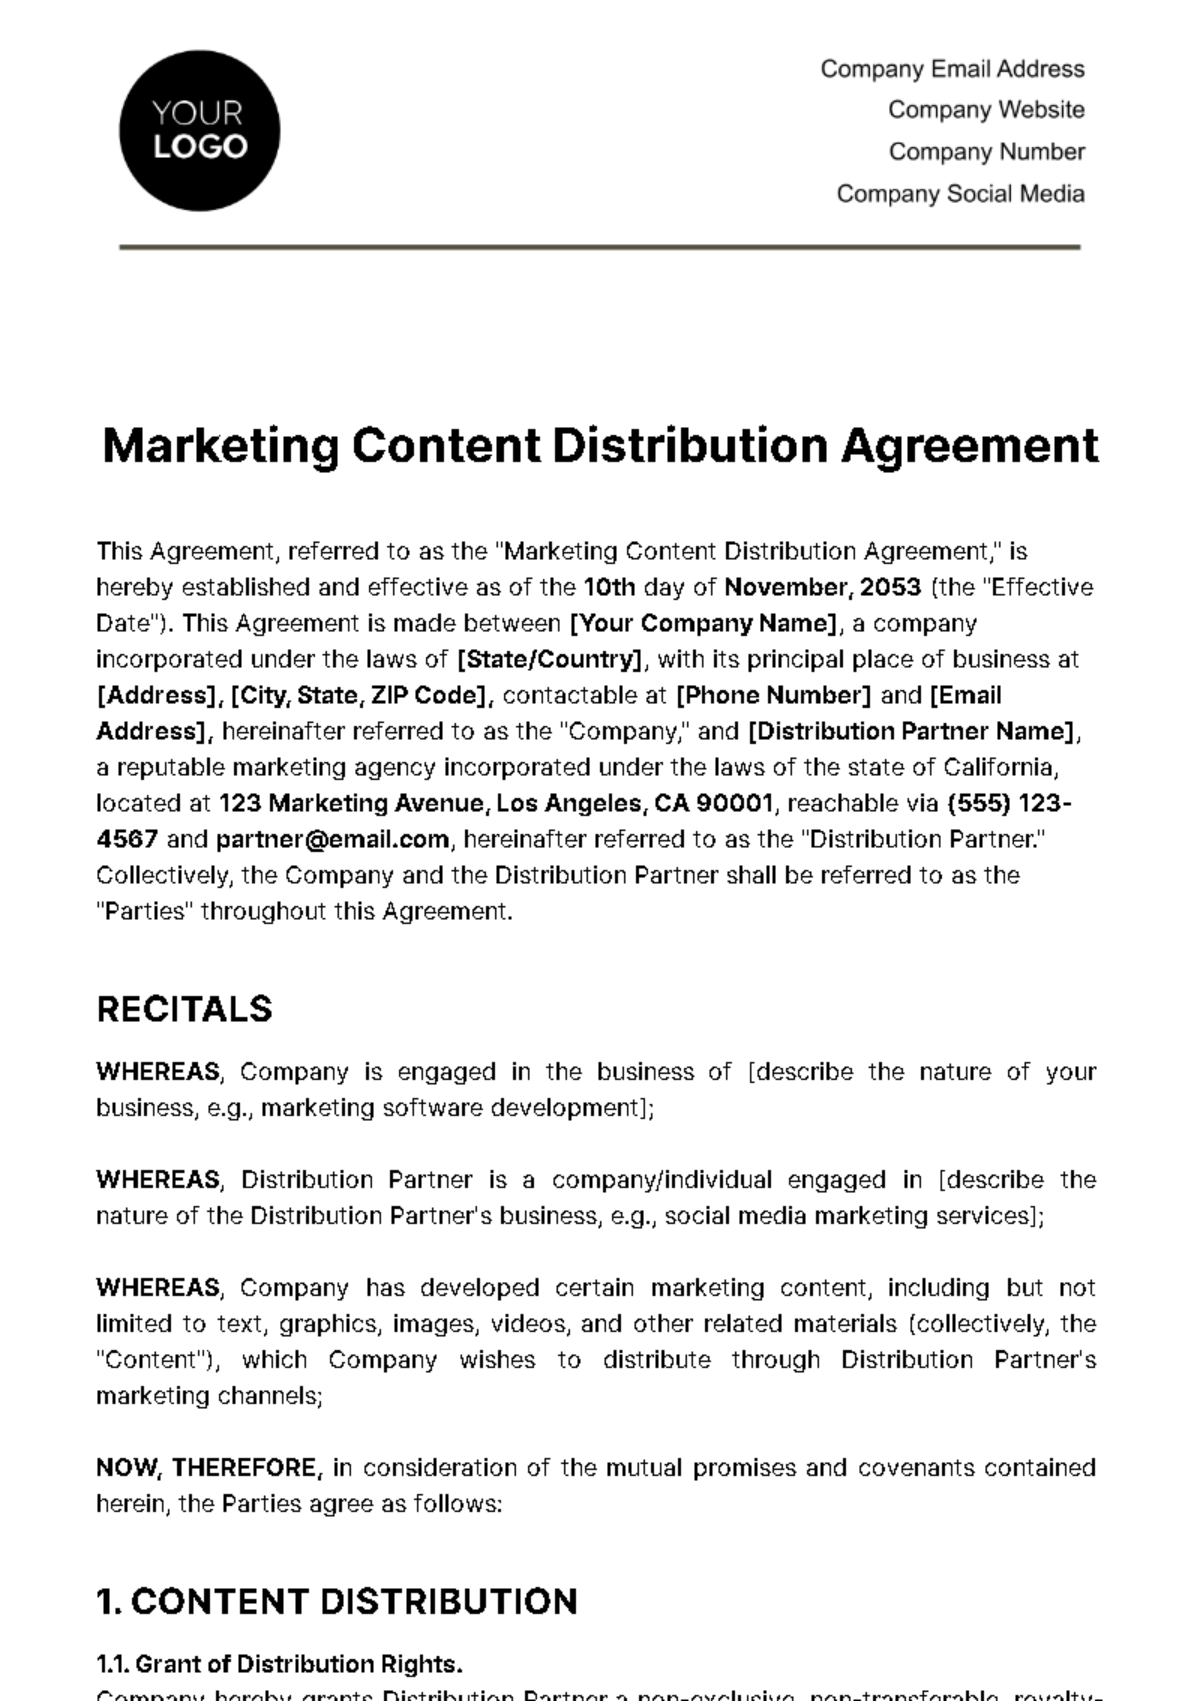 Free Marketing Content Distribution Agreement Template